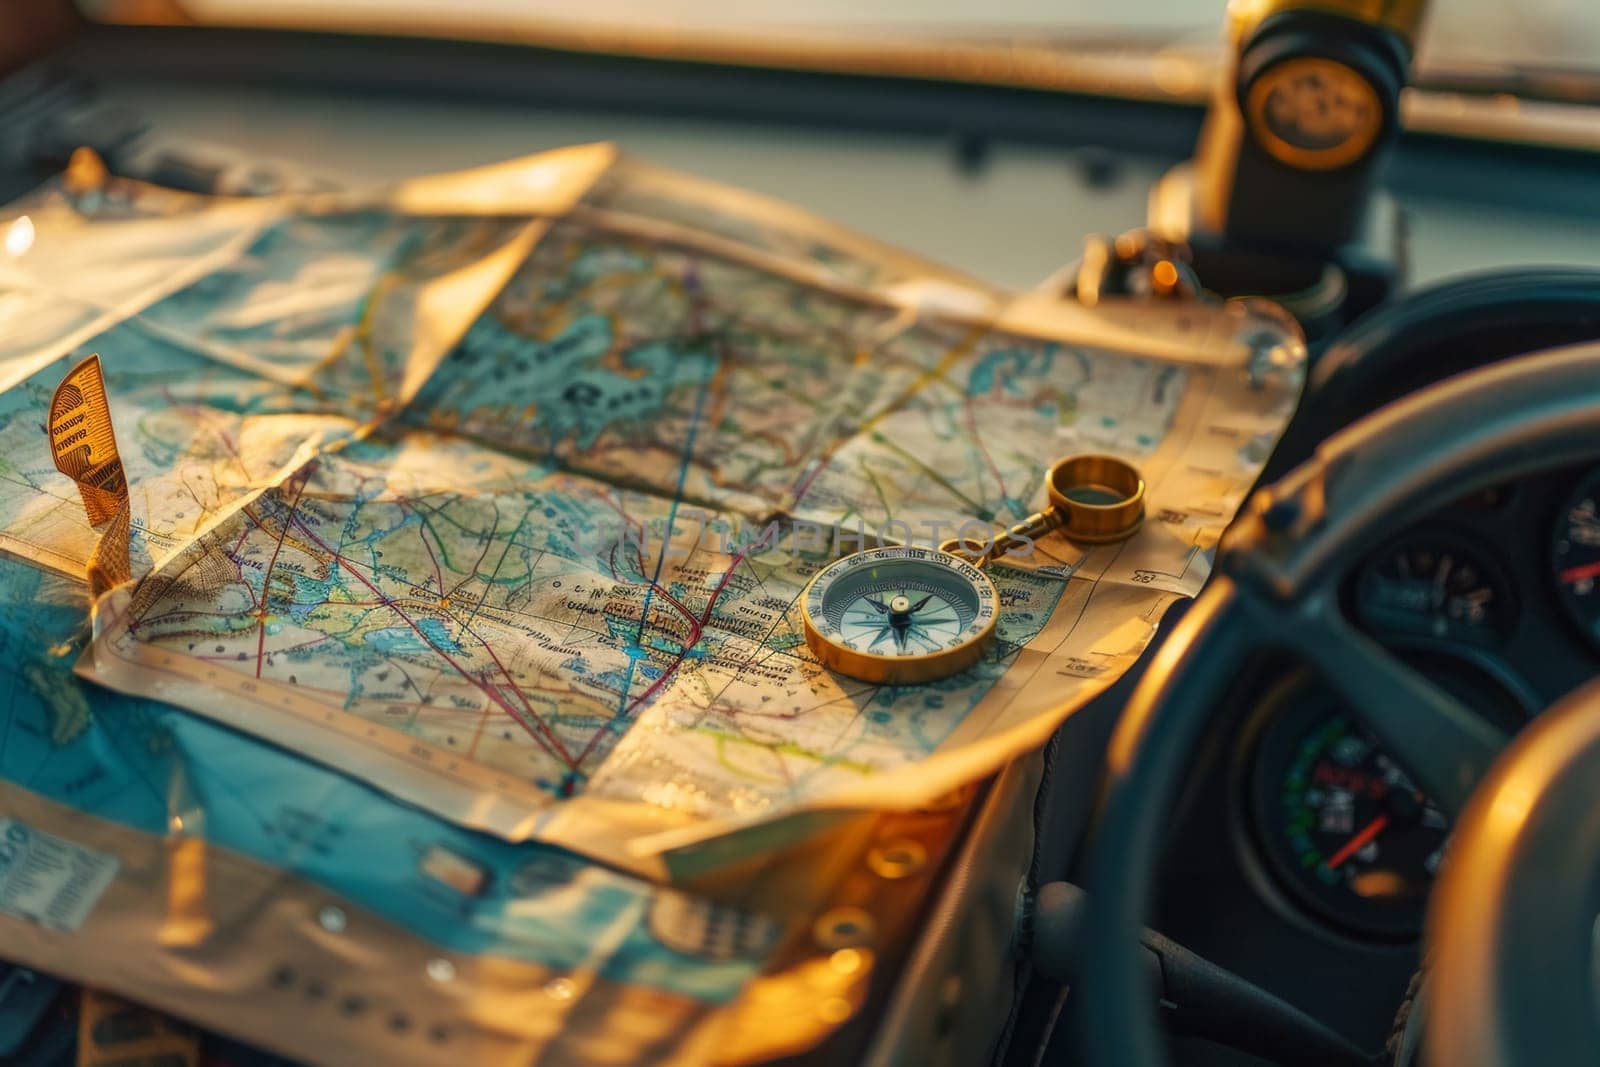 A compass and map spread across a car dashboard, ready for a road trip, with a breathtaking mountainous landscape stretching out in front of the car